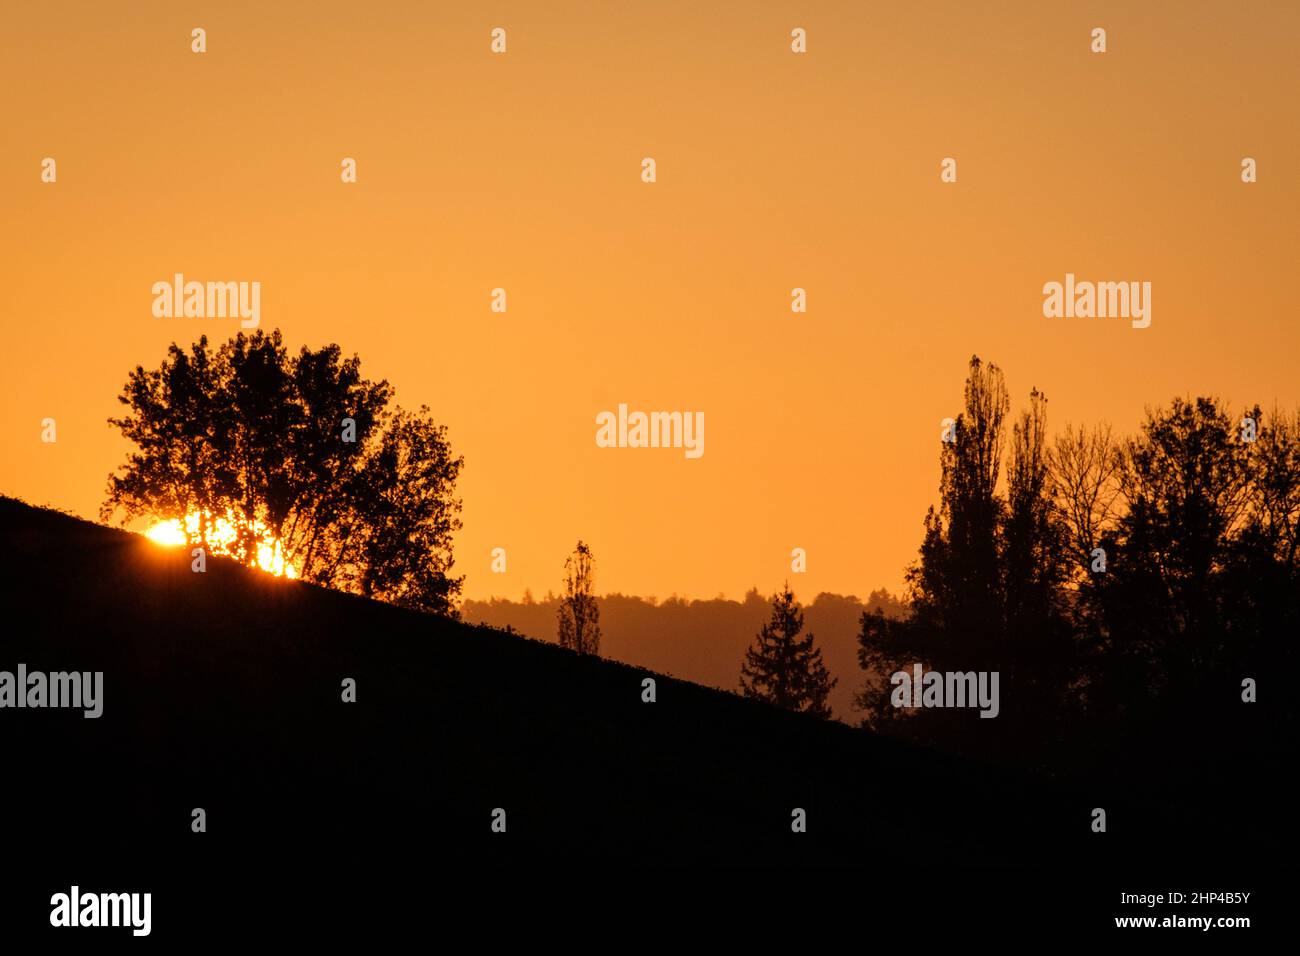 Sunrise in german landscape with trees back lit Stock Photo